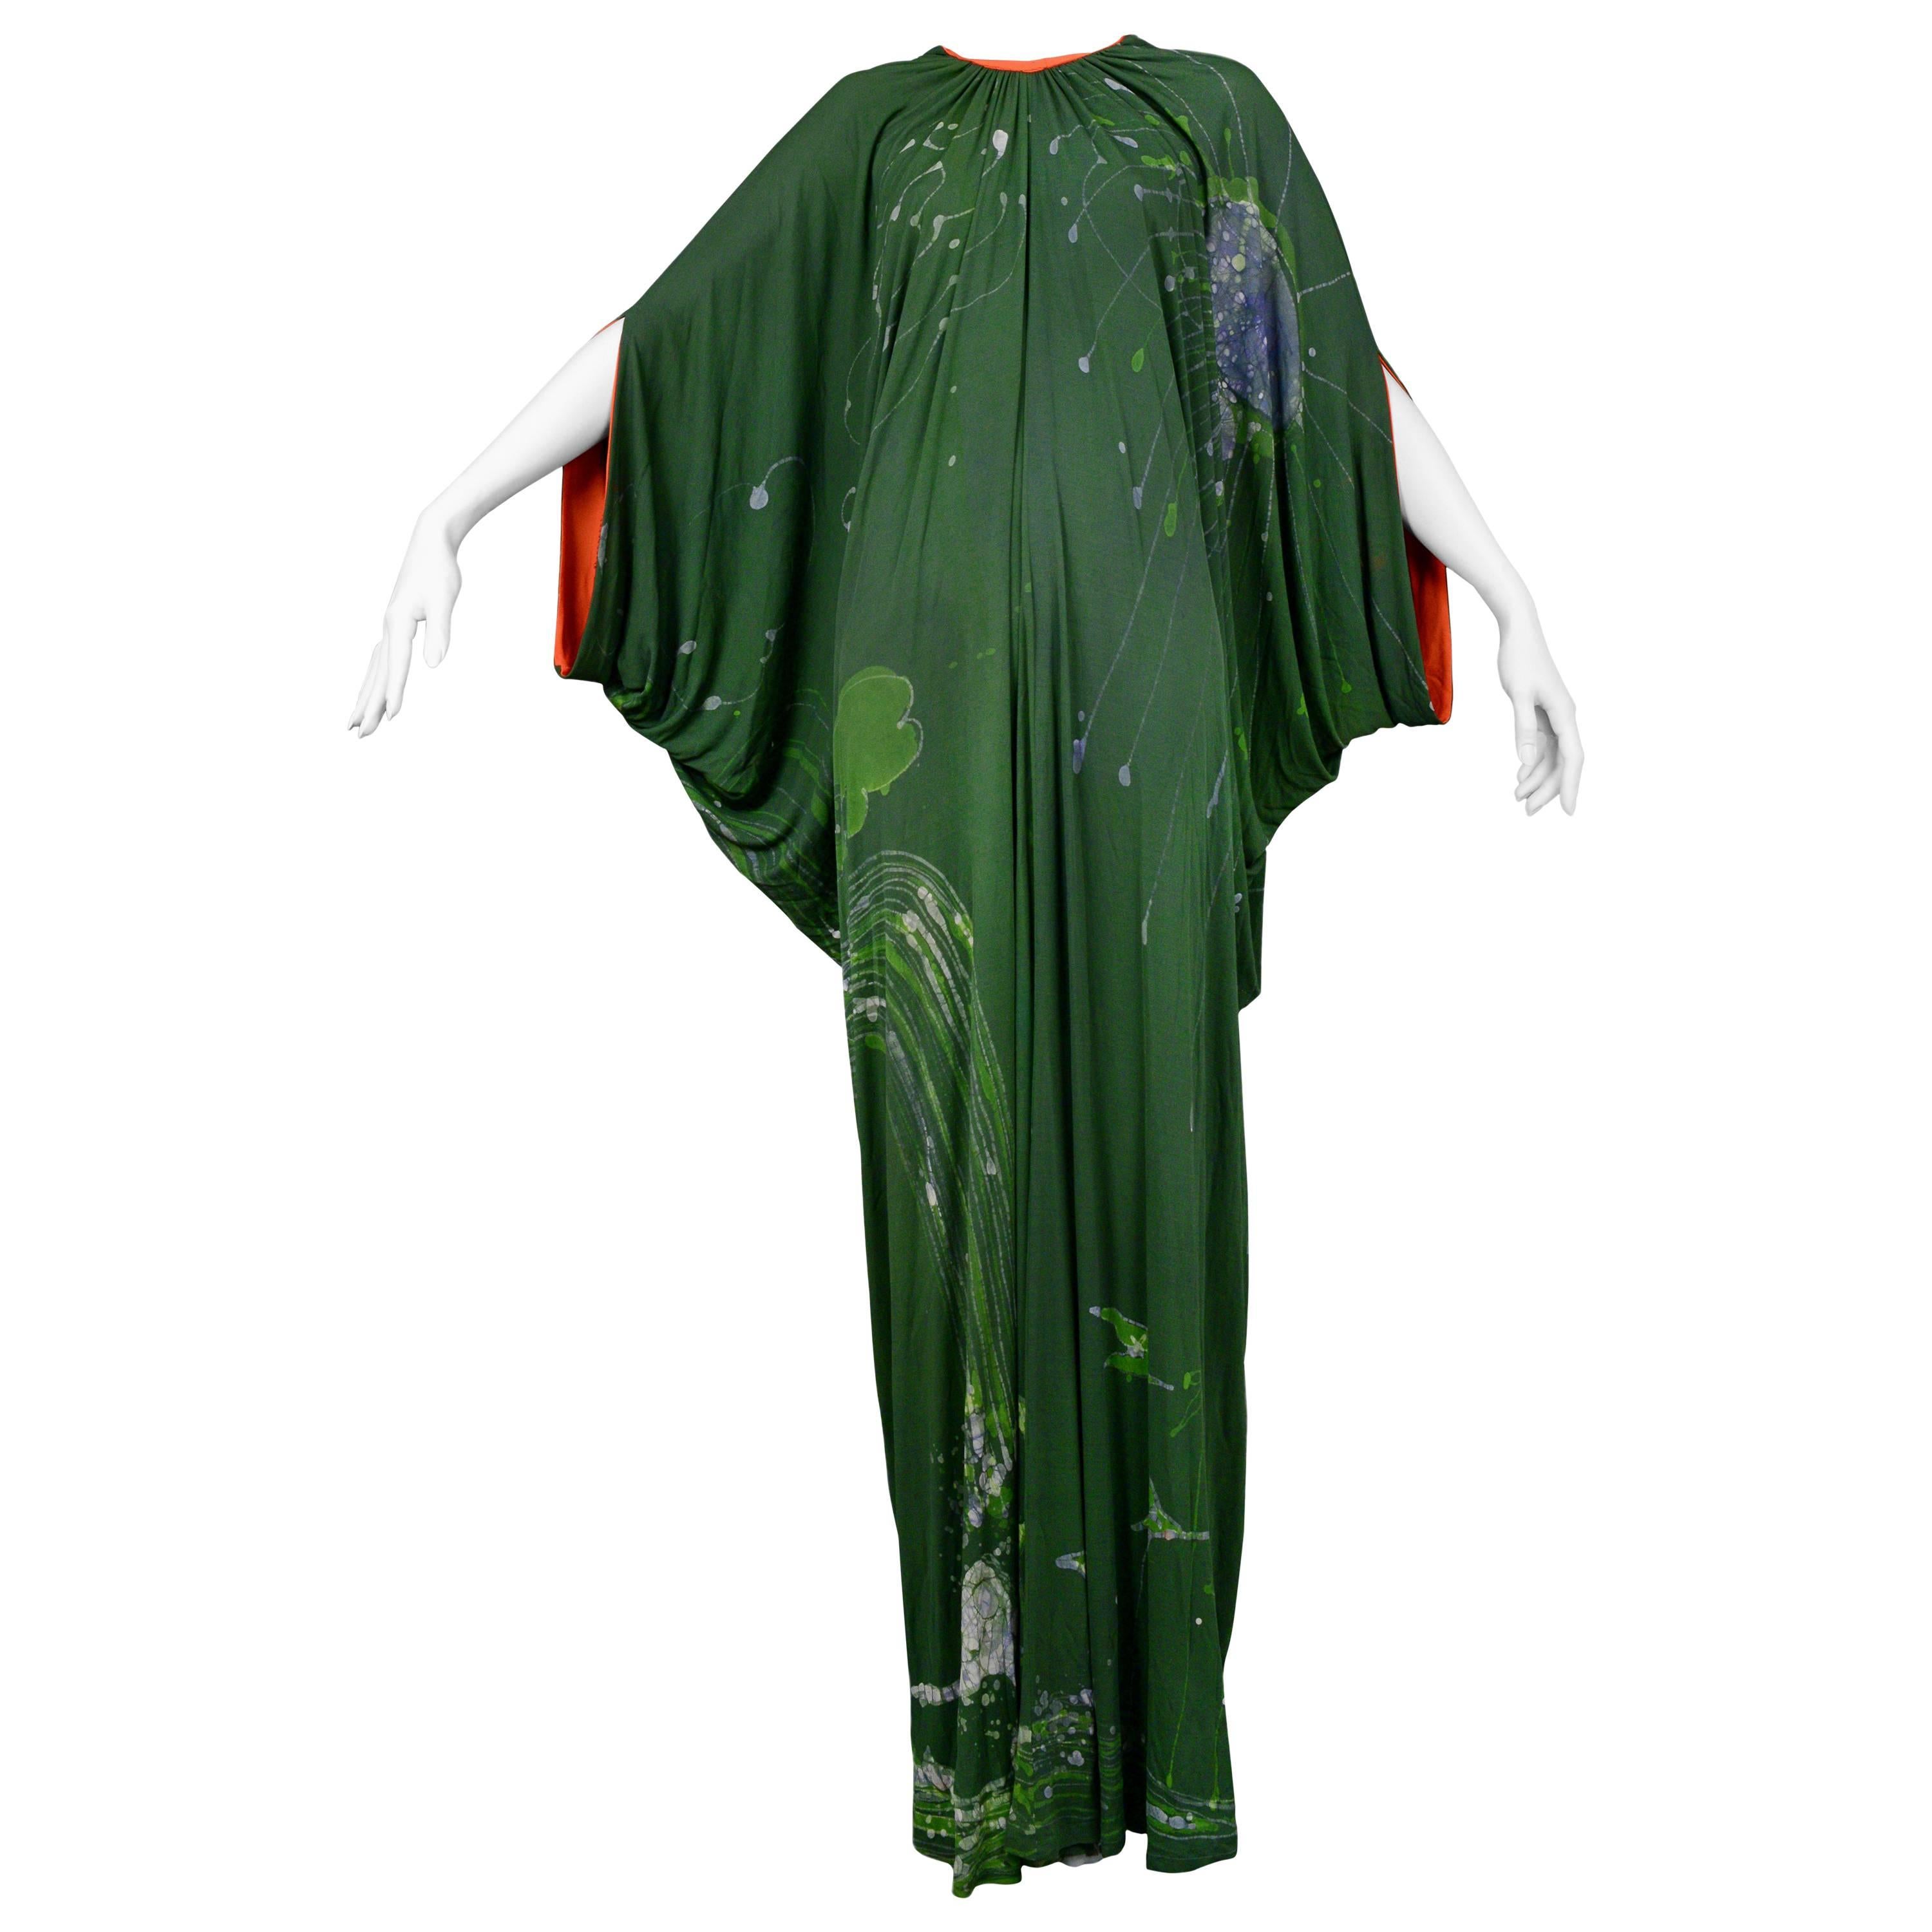 Vintage Yuki London forest green island theme batik heavily draped caftan with bright orange trim.
Please inquire for additional images.